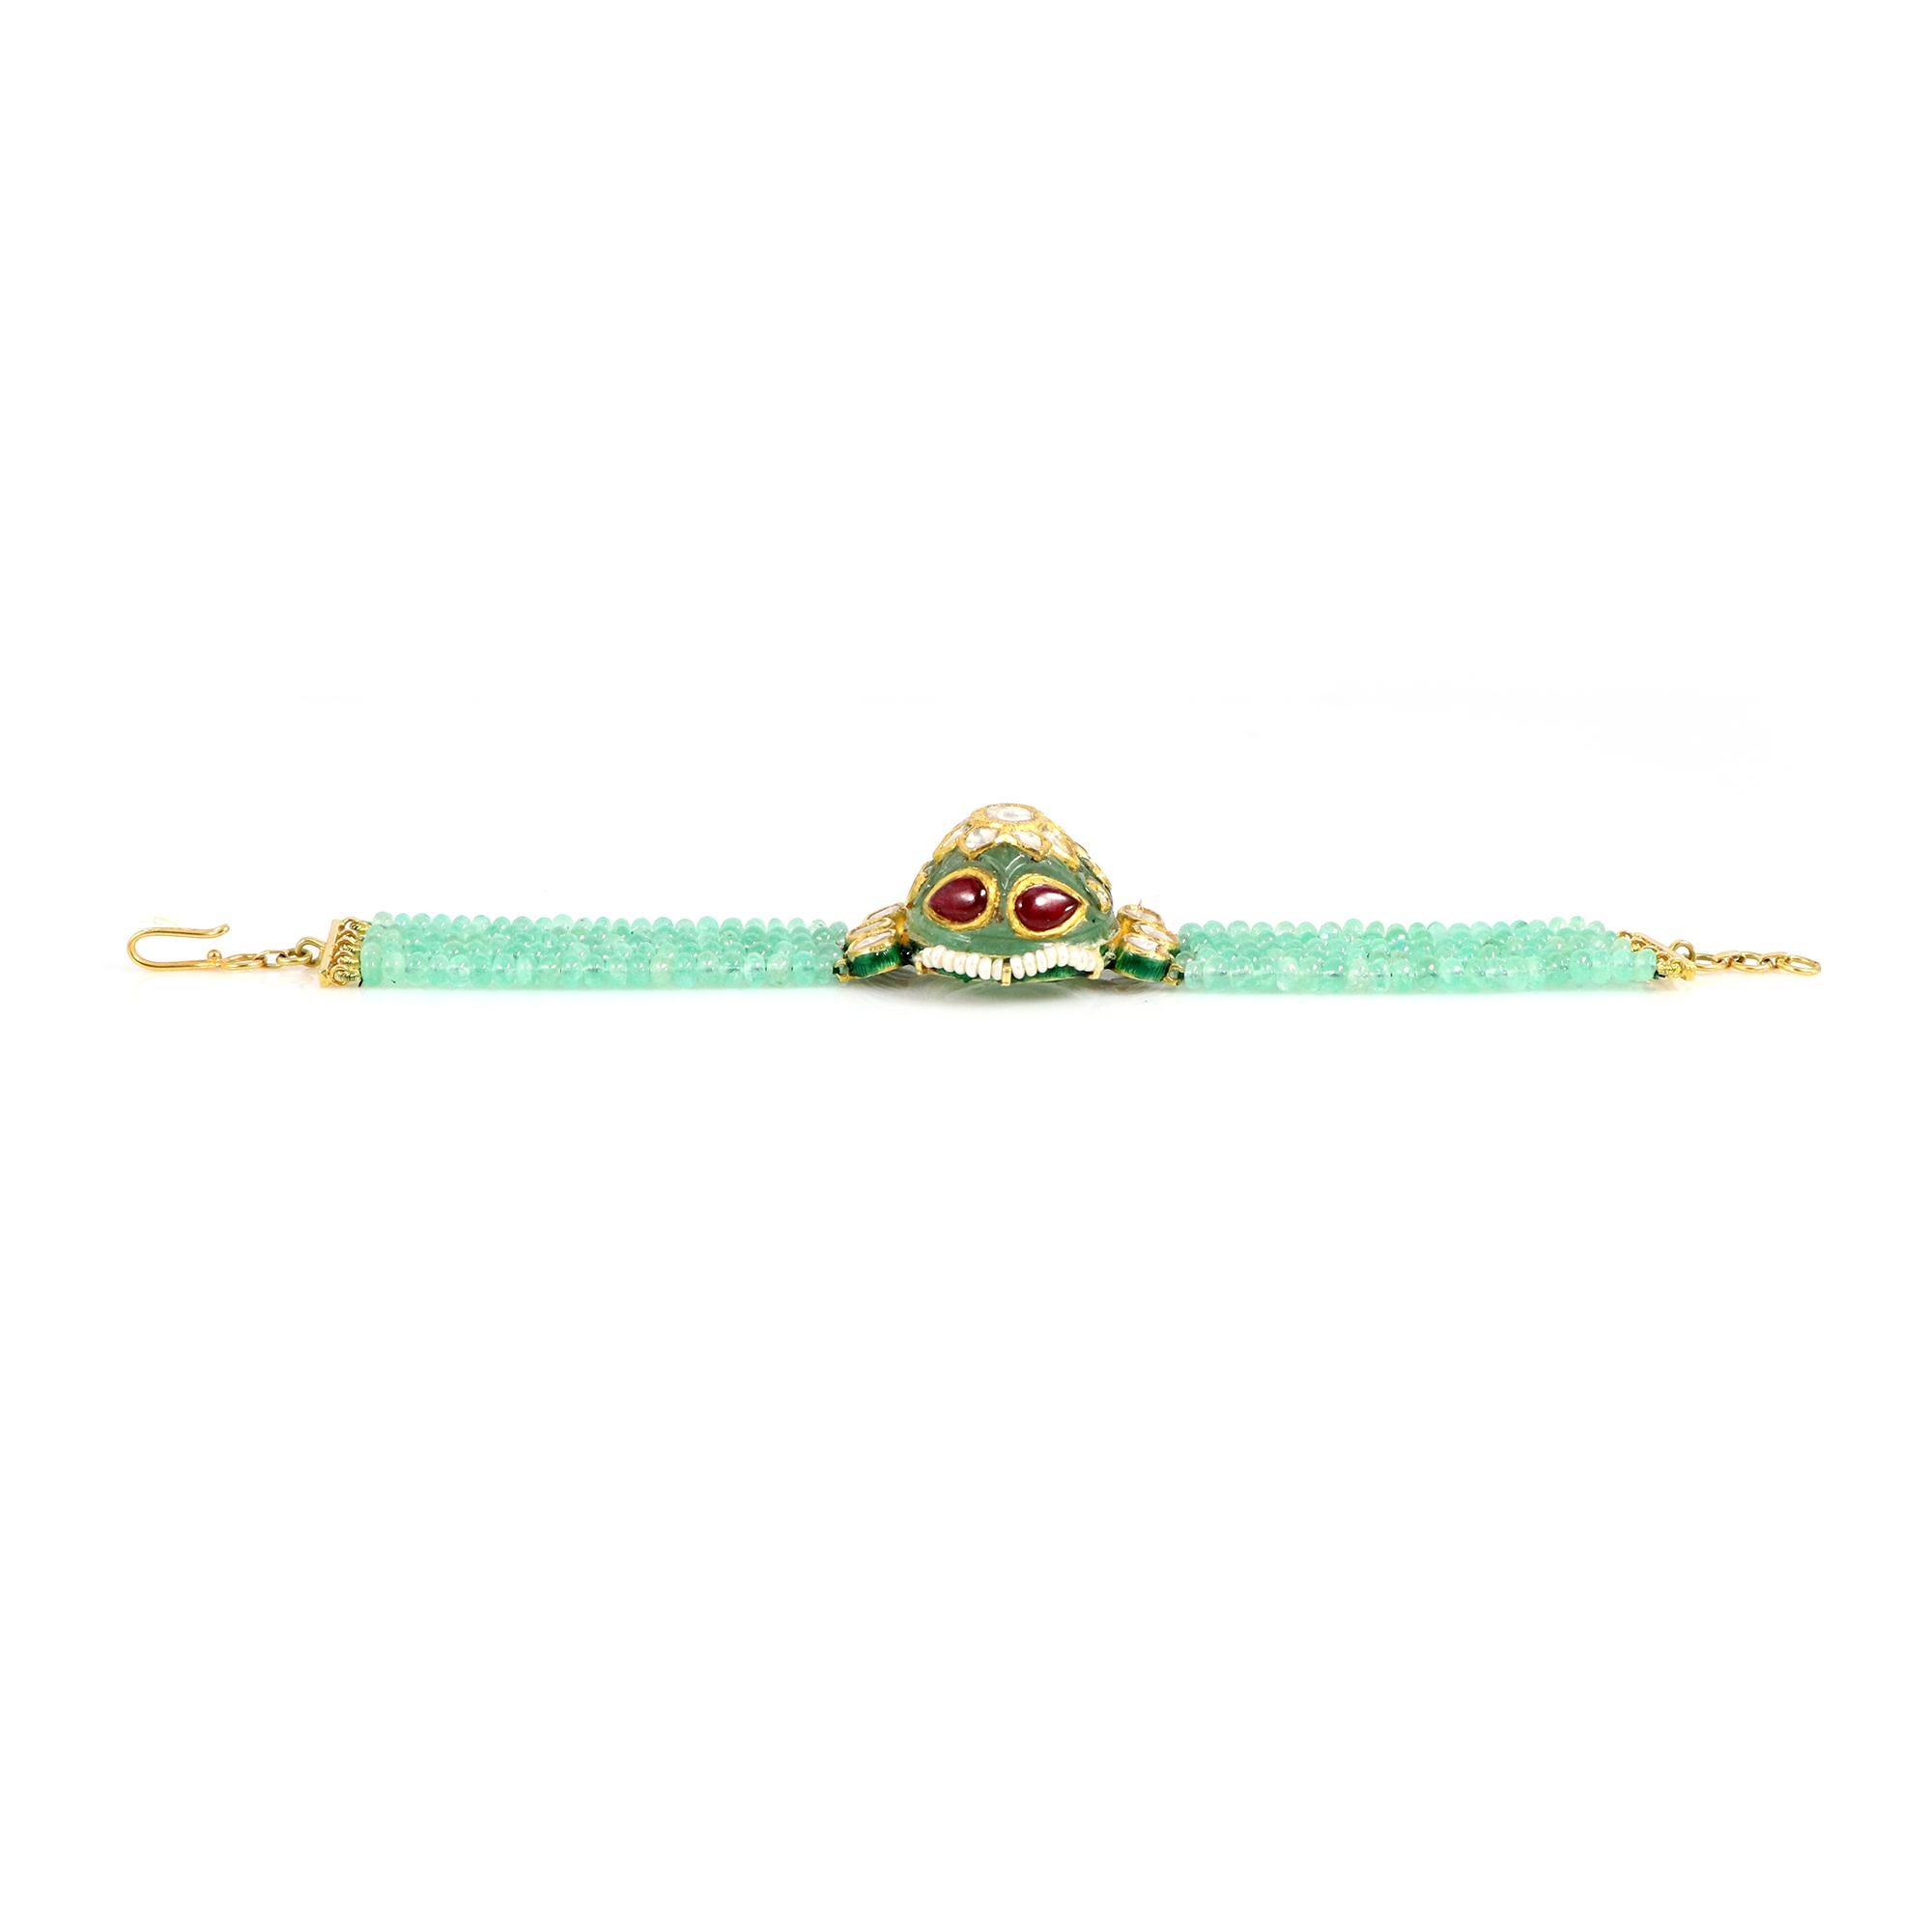 This is an elegant carved Zambian Emerald bracelet adorned with mesmerizing rubies and lustrous pearls and enameling in the back. Handcrafted with meticulous attention to detail, this stunning piece is a testament to timeless elegance. The vibrant